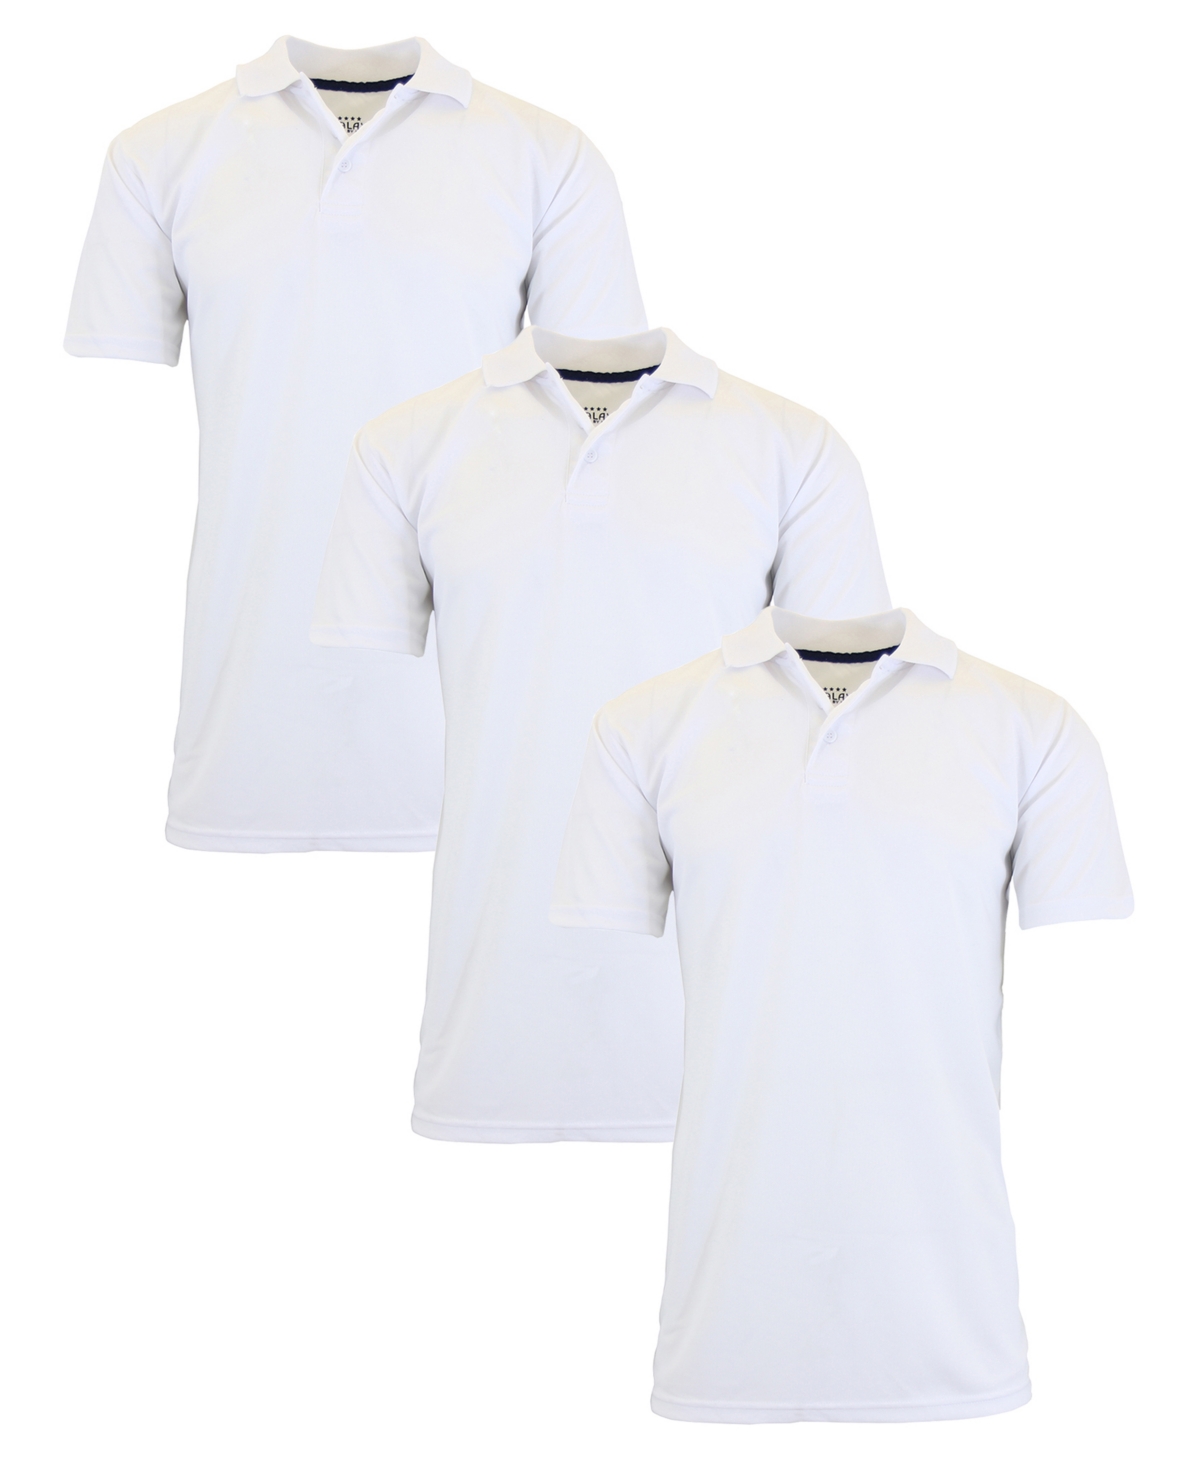 Men's Dry Fit Moisture-Wicking Polo Shirt, Pack of 3 - White